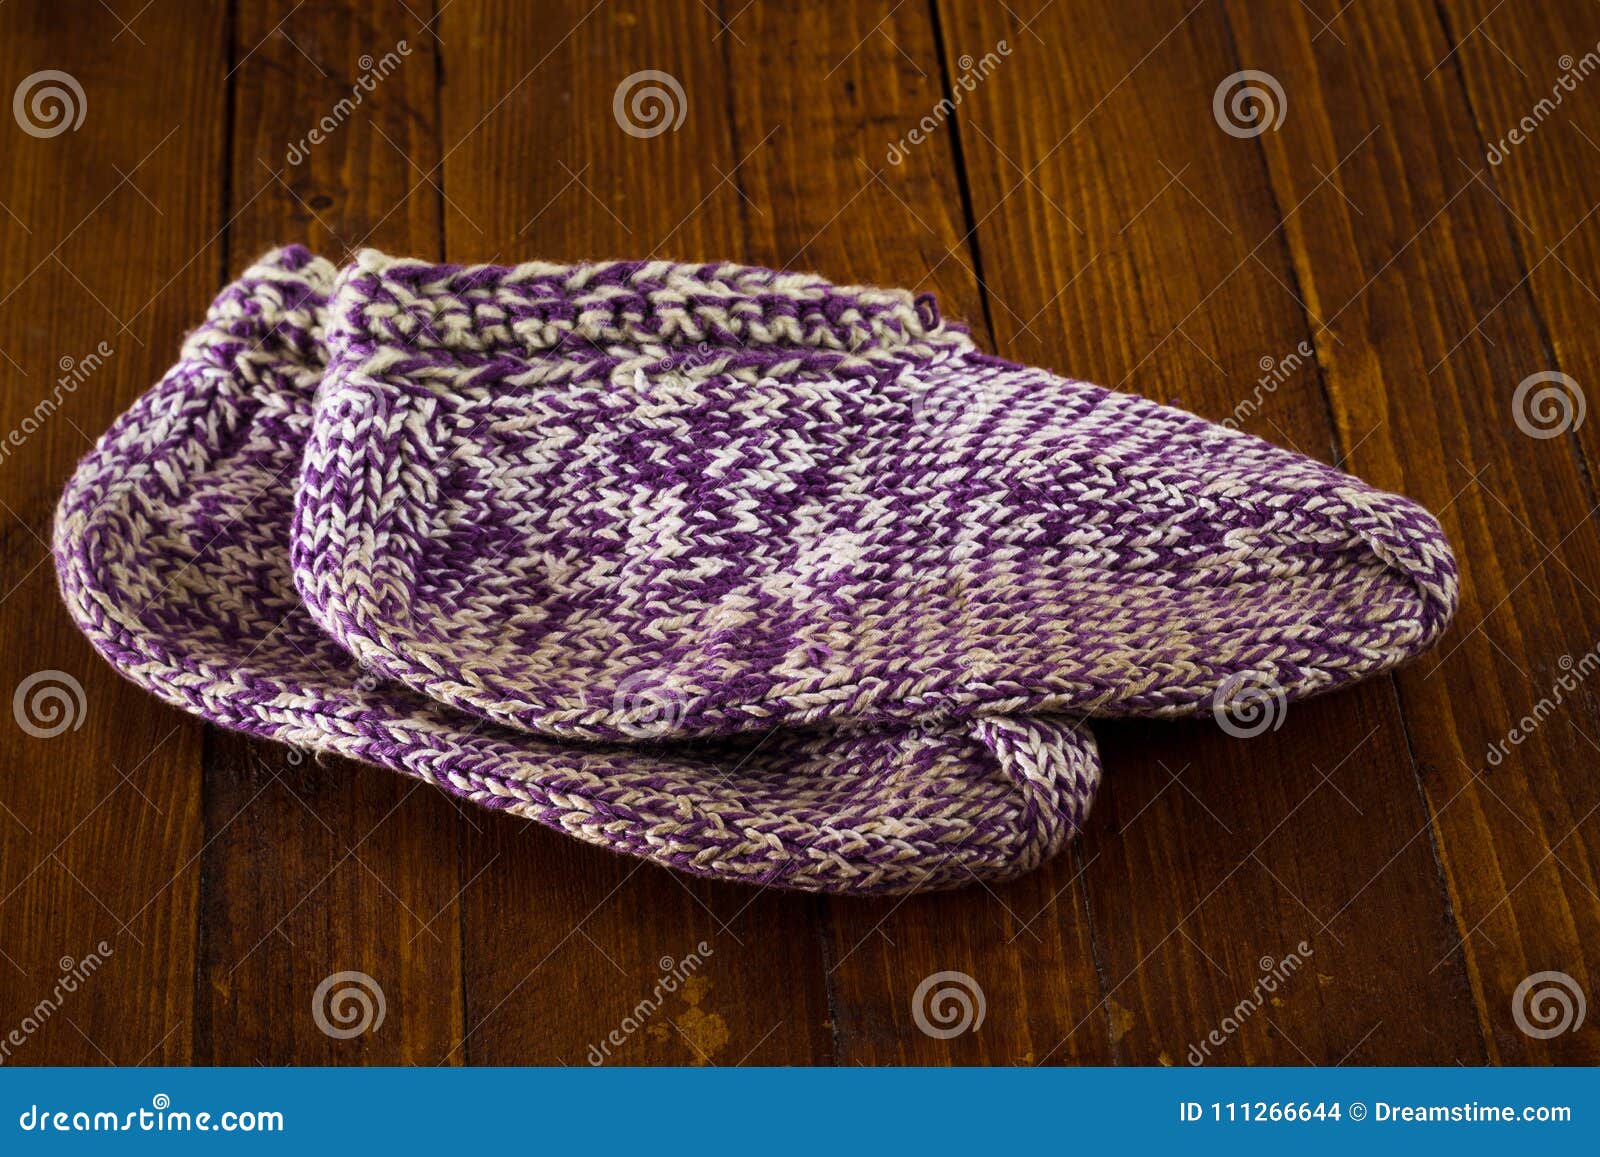 Handmade Knitted Wool Socks on Wooden Table Stock Photo - Image of ...